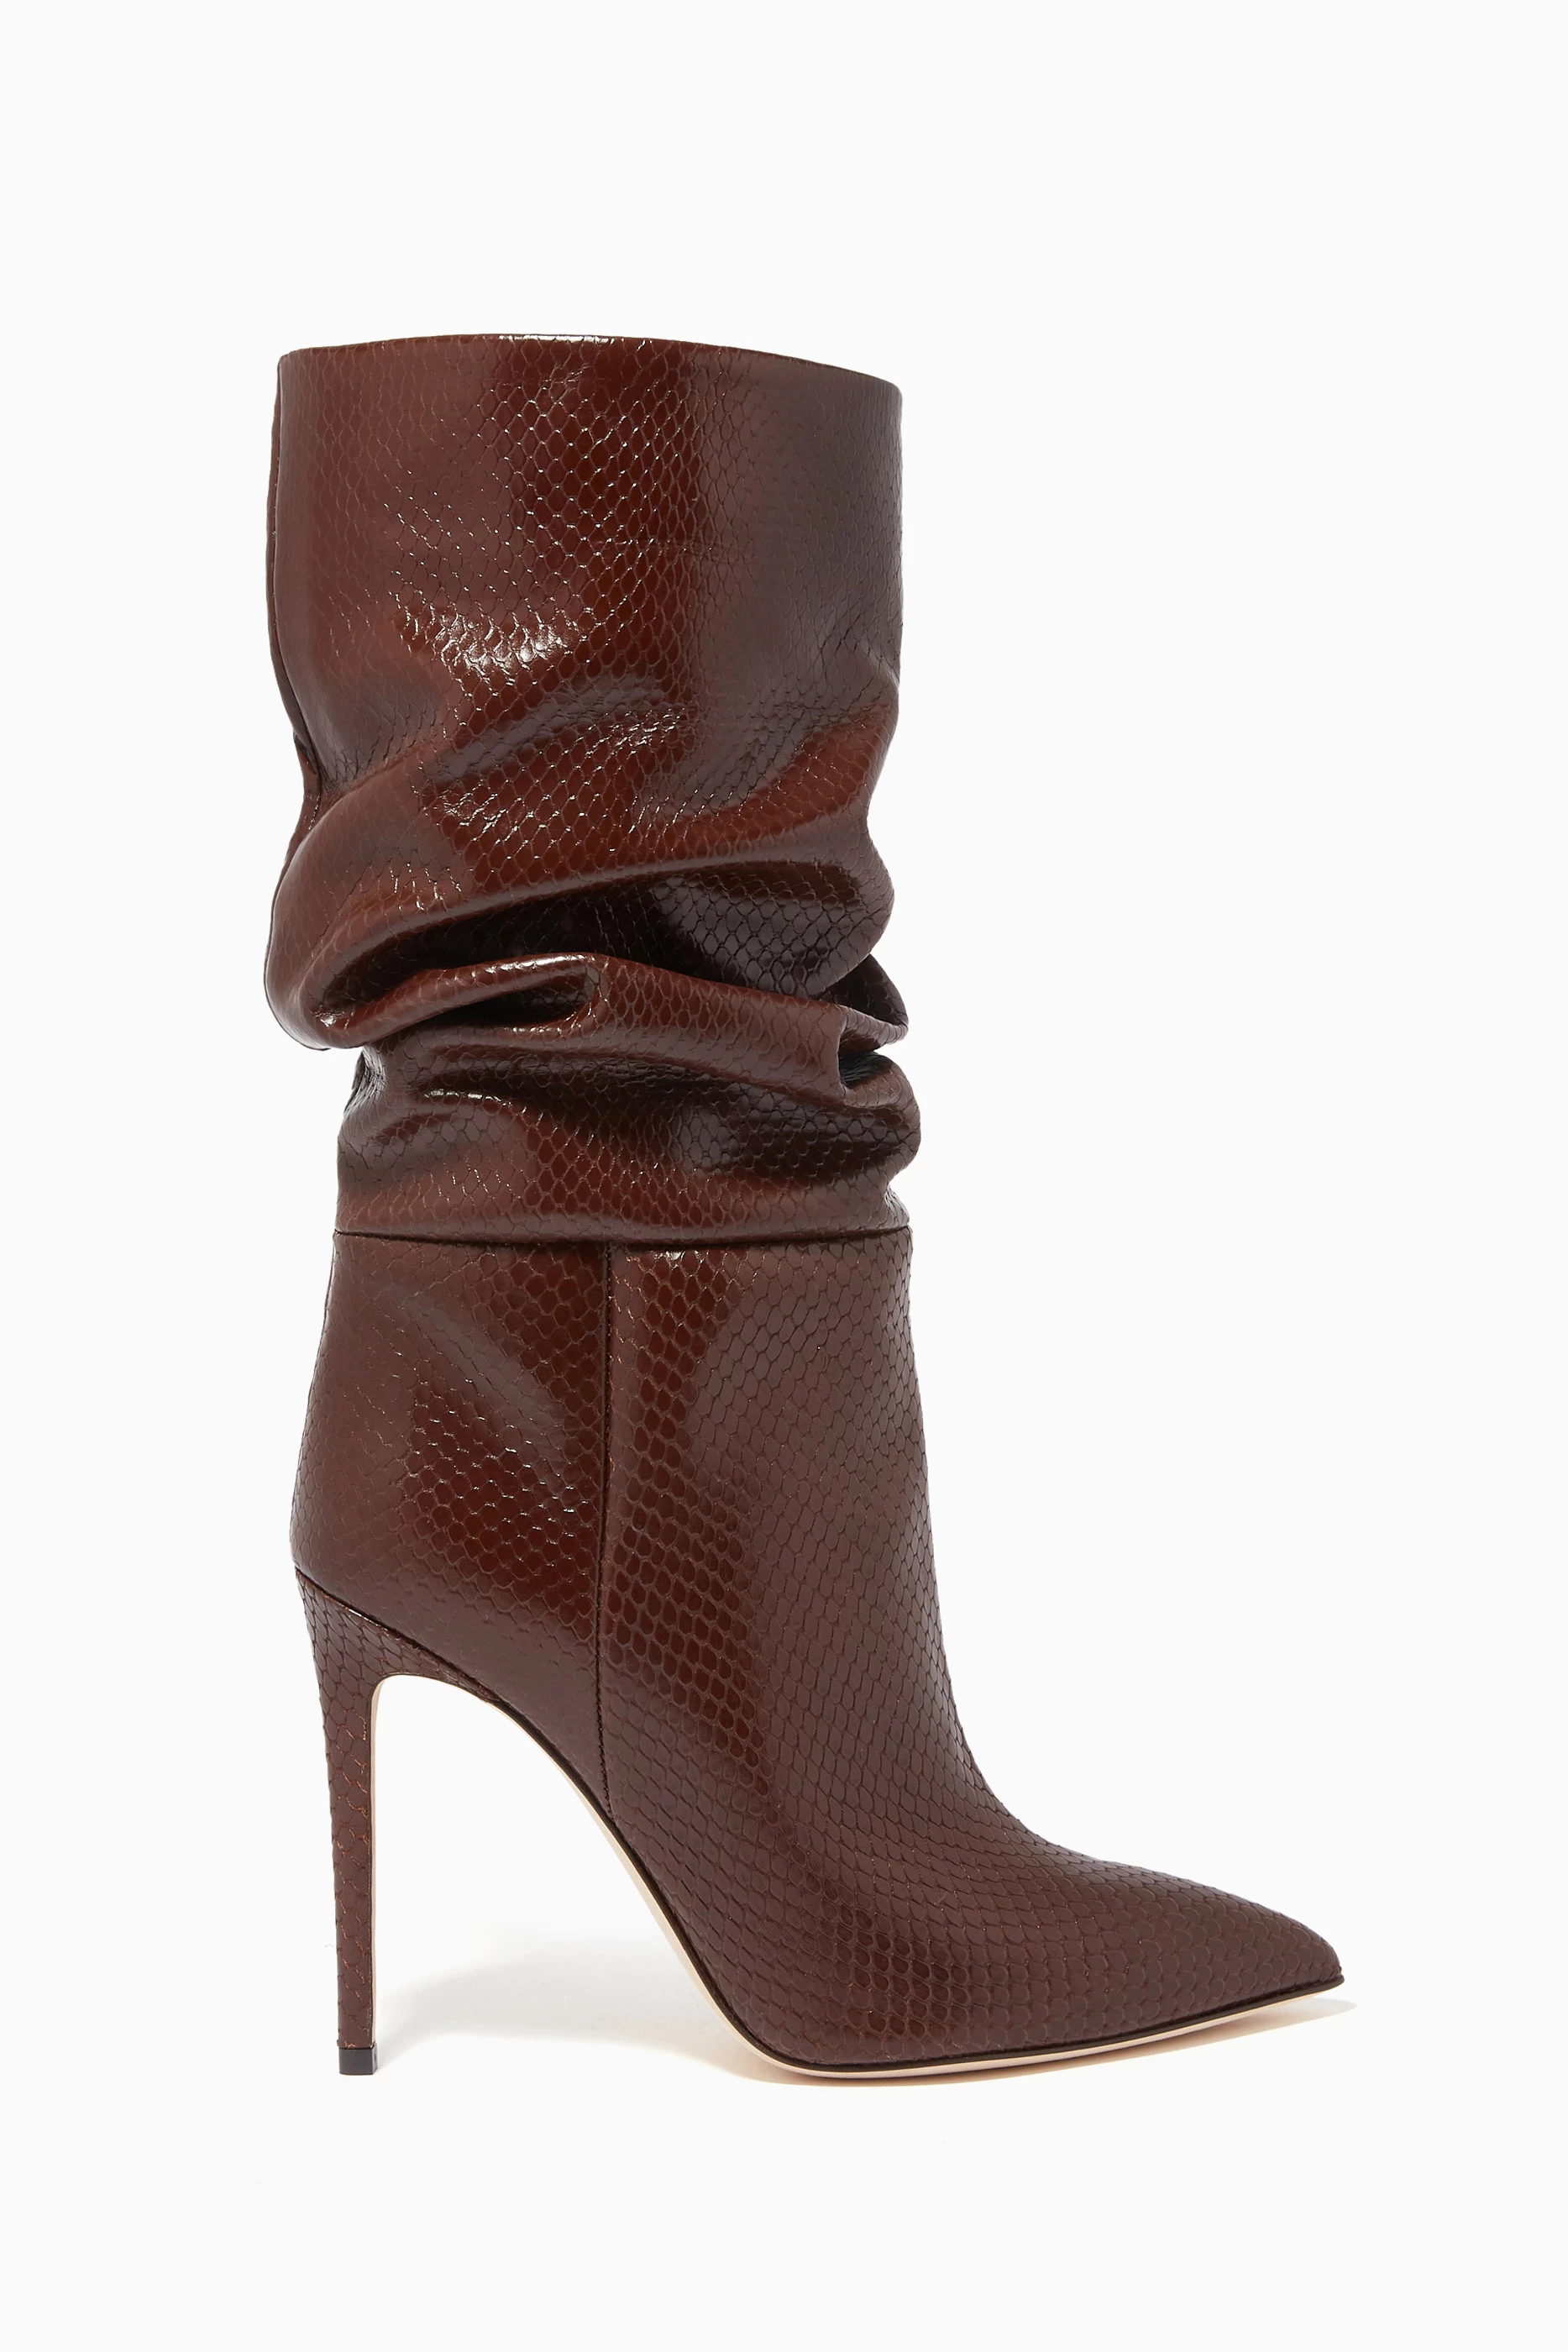 Paris Texas slouchy leather boots